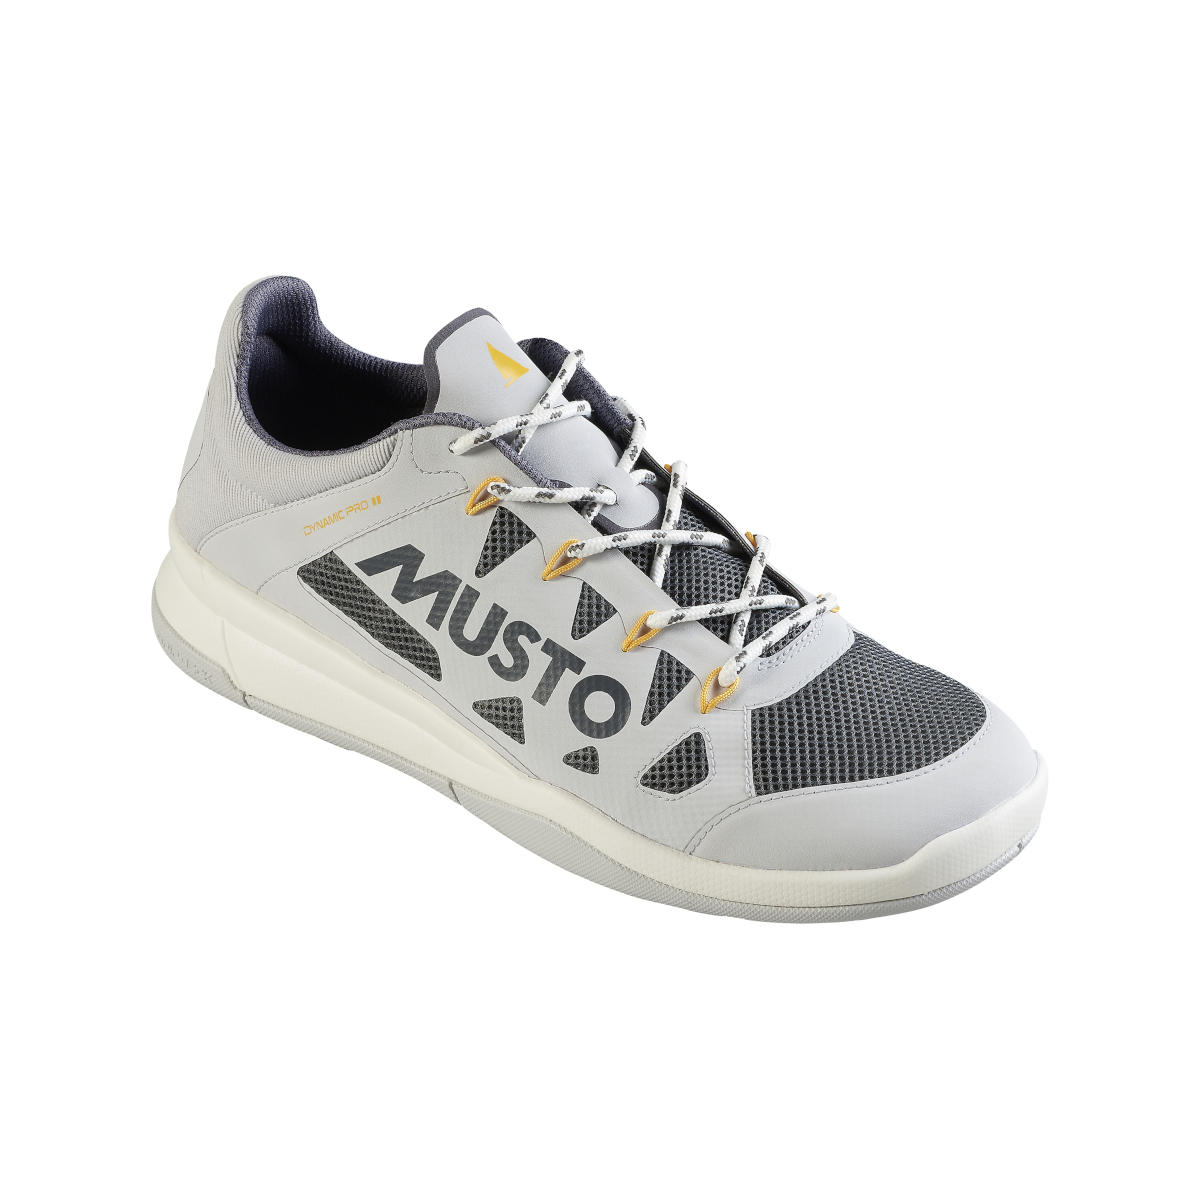 Musto Dynamic Pro II Adapt chaussures bateau homme gris clair / jaune, taille 44